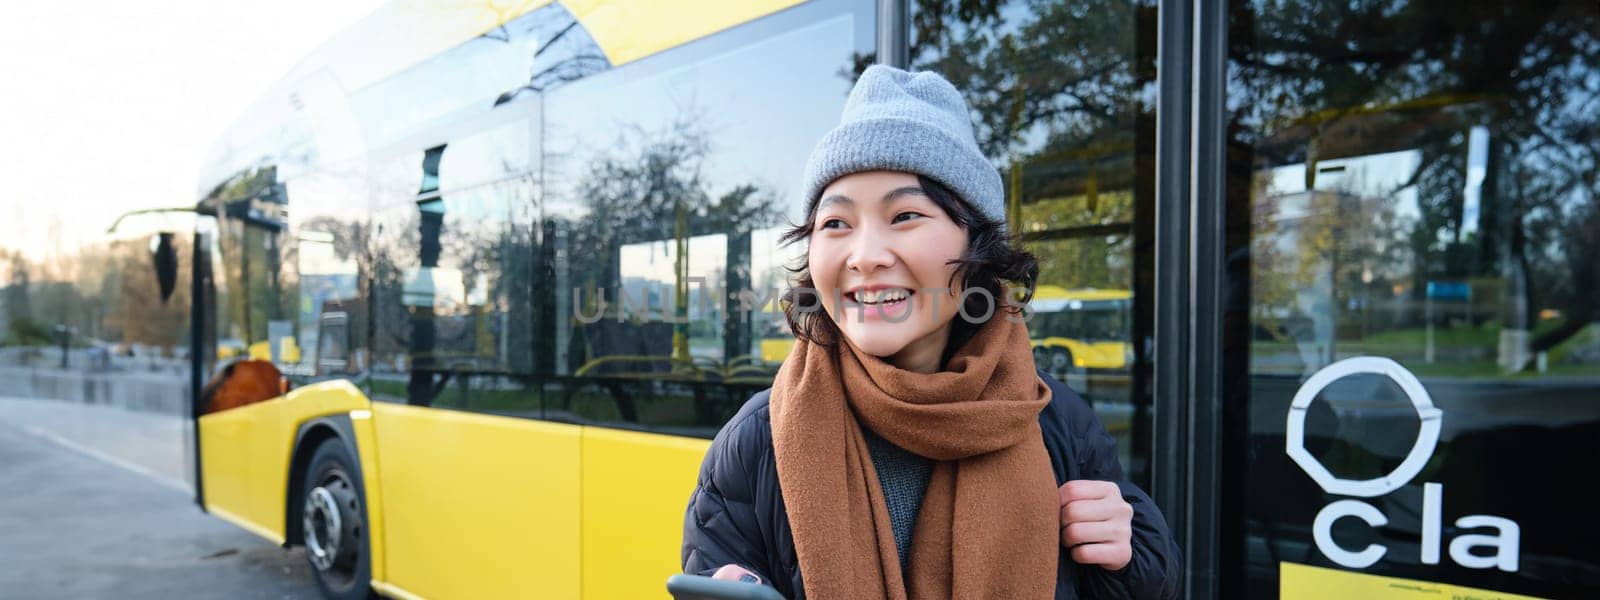 Portrait of girl standing near bus on a stop, waiting for her public transport, schecks schedule on smartphone application, holds mobile phone, wears warm clothes.